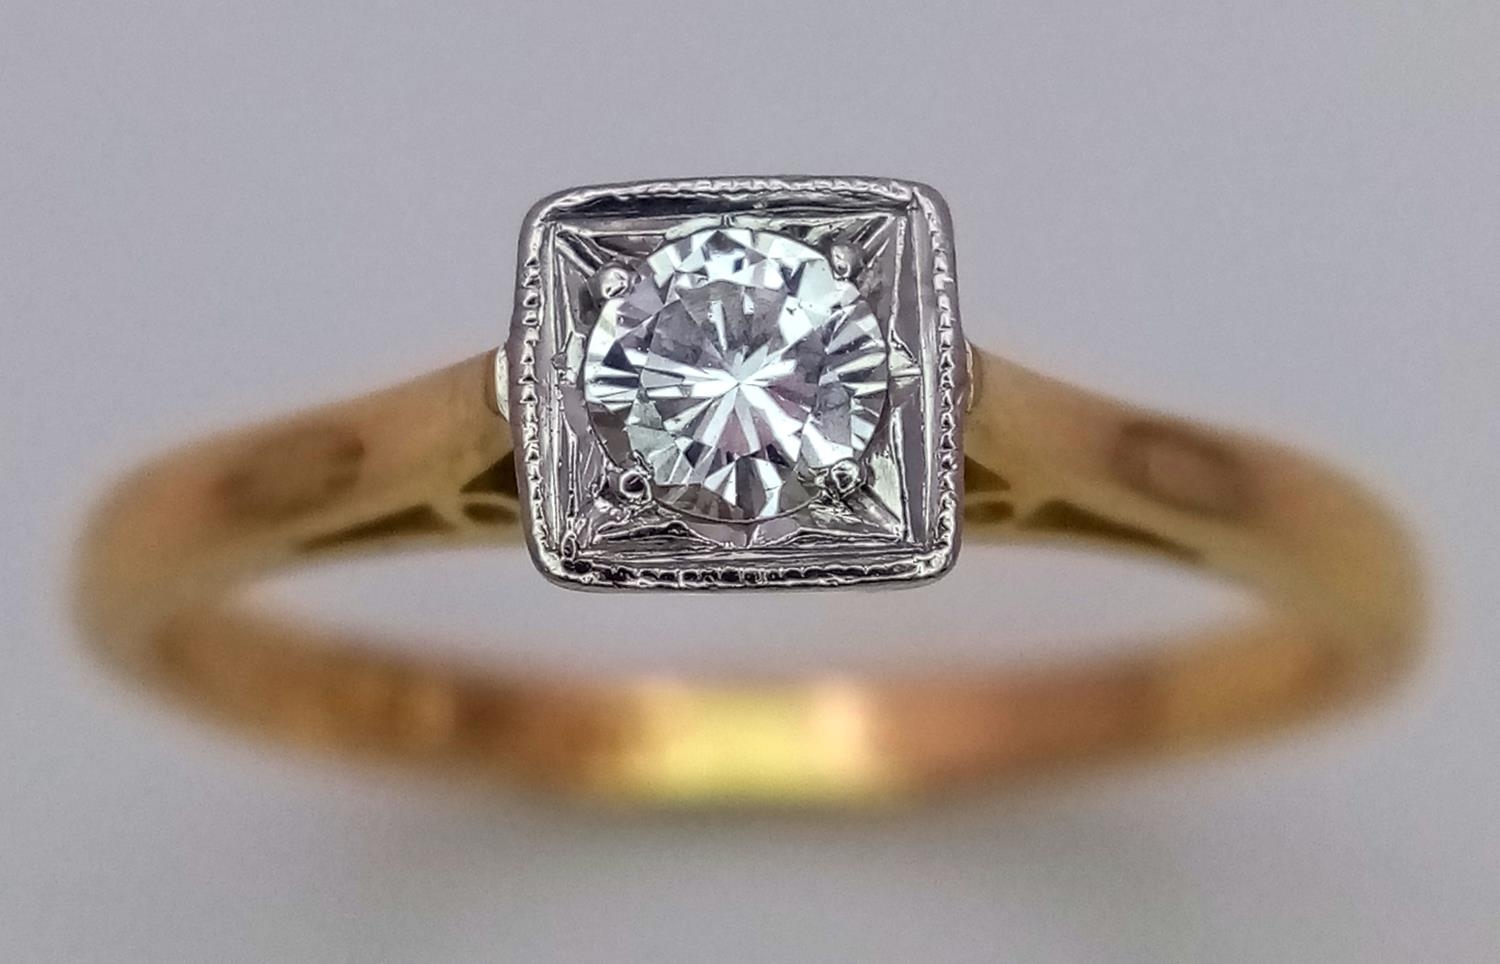 A 18K YELLOW GOLD & PLATINUM DIAMOND SOLITAIRE RING 0.15CT 2.6G SIZE M/N SPAS 9001 - Image 2 of 5